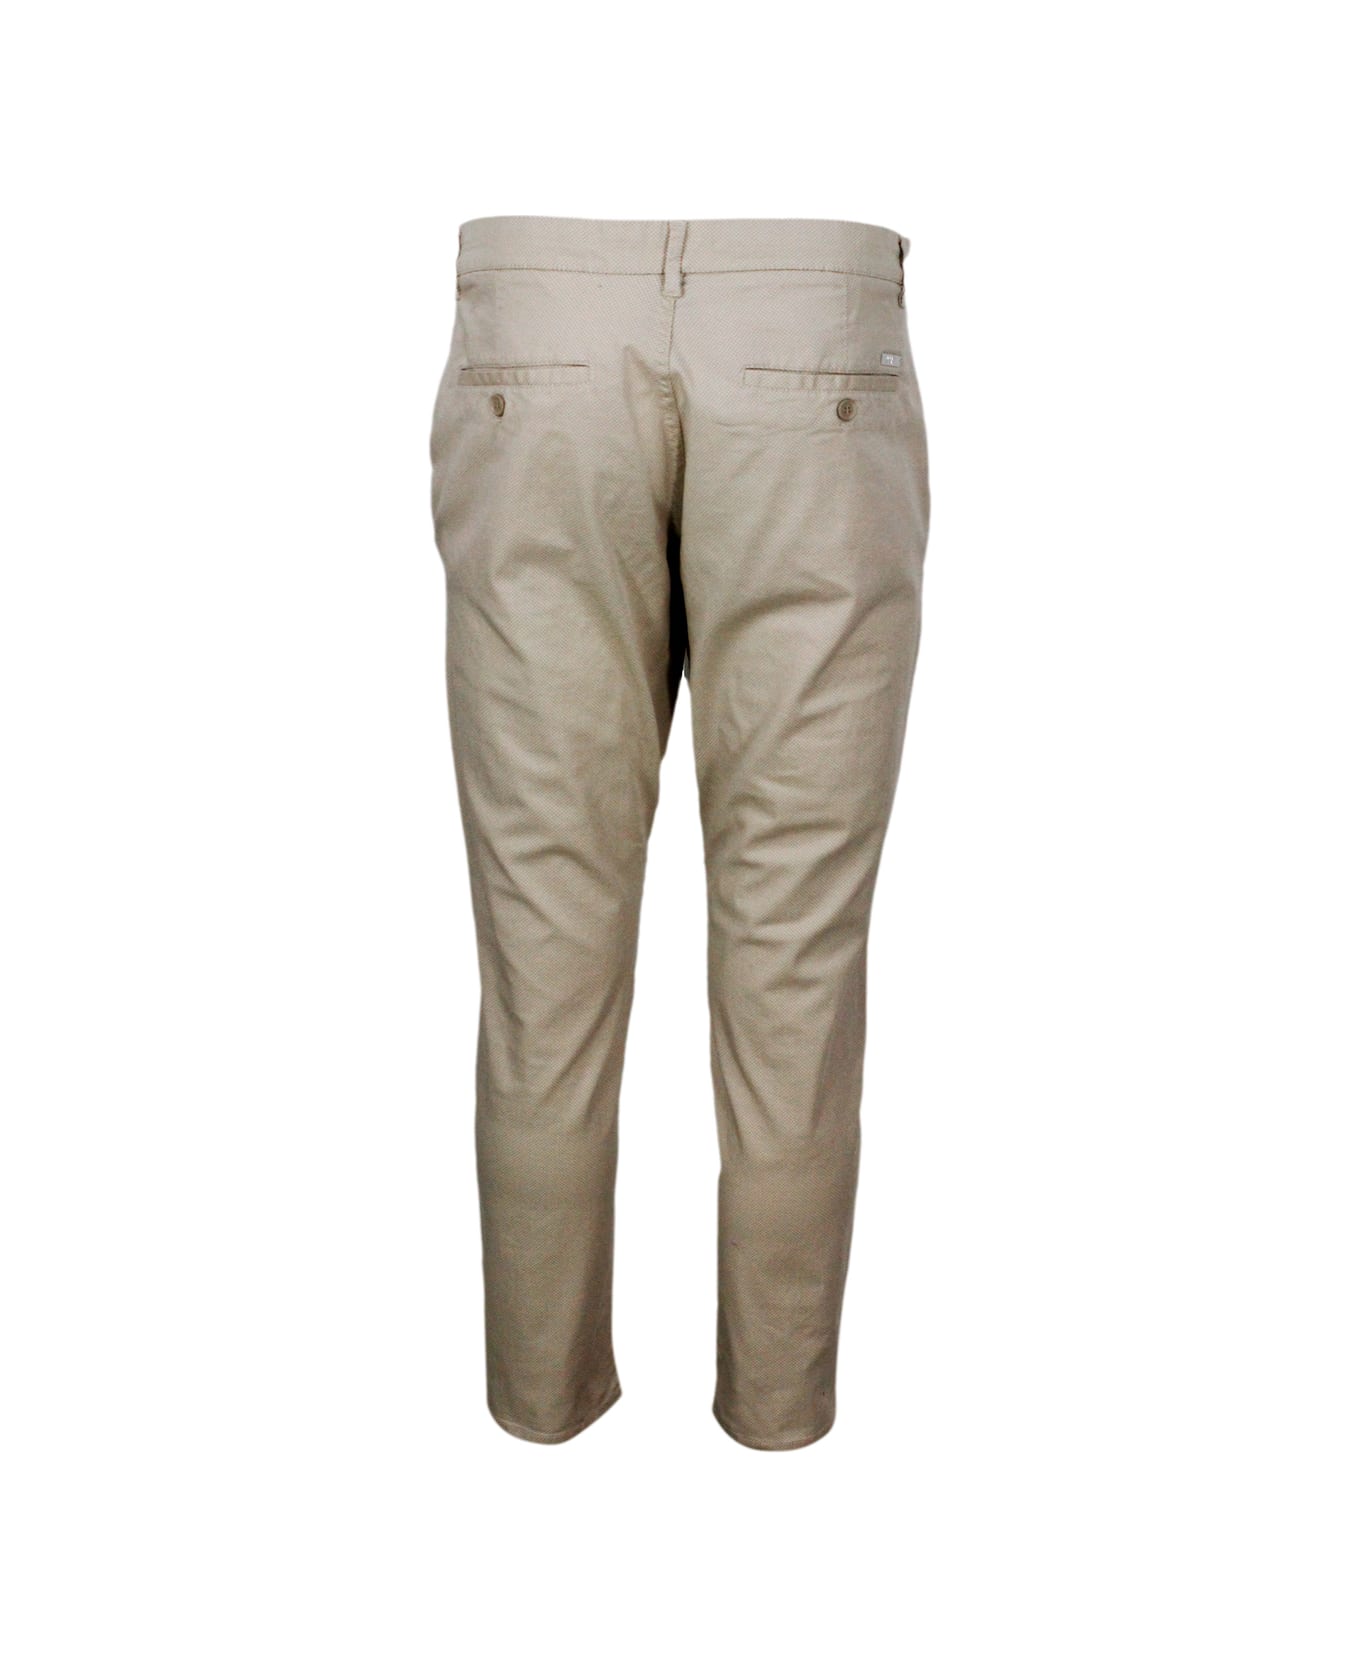 Armani Collezioni Stretch Cotton Trousers With Welt Pockets And Zip And Button Closure - Beige